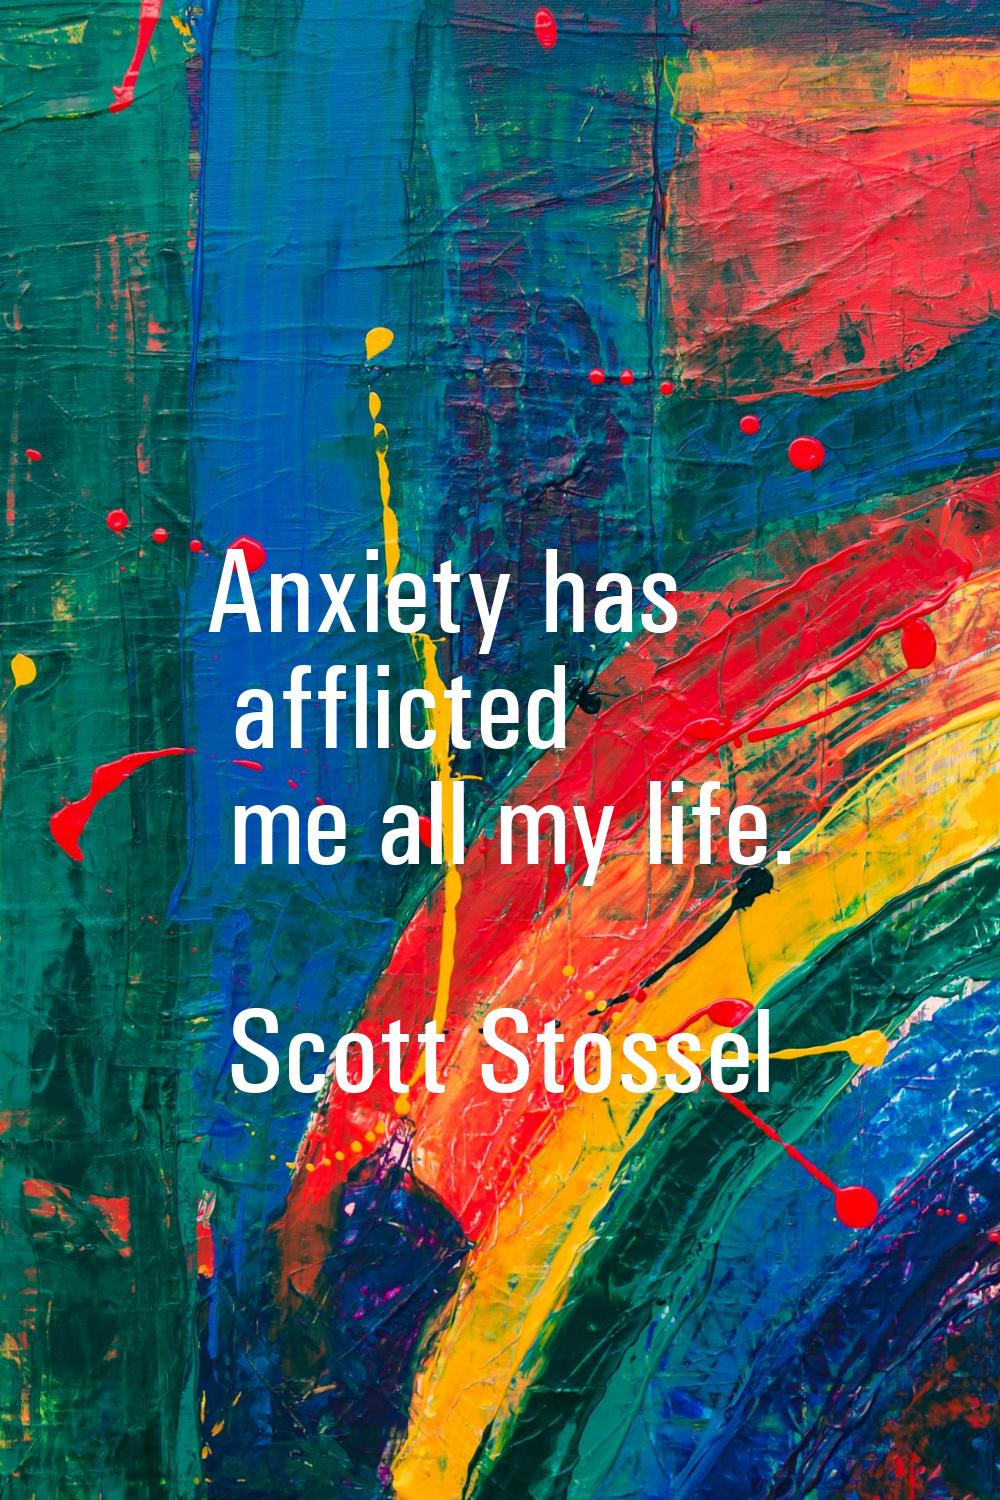 Anxiety has afflicted me all my life.